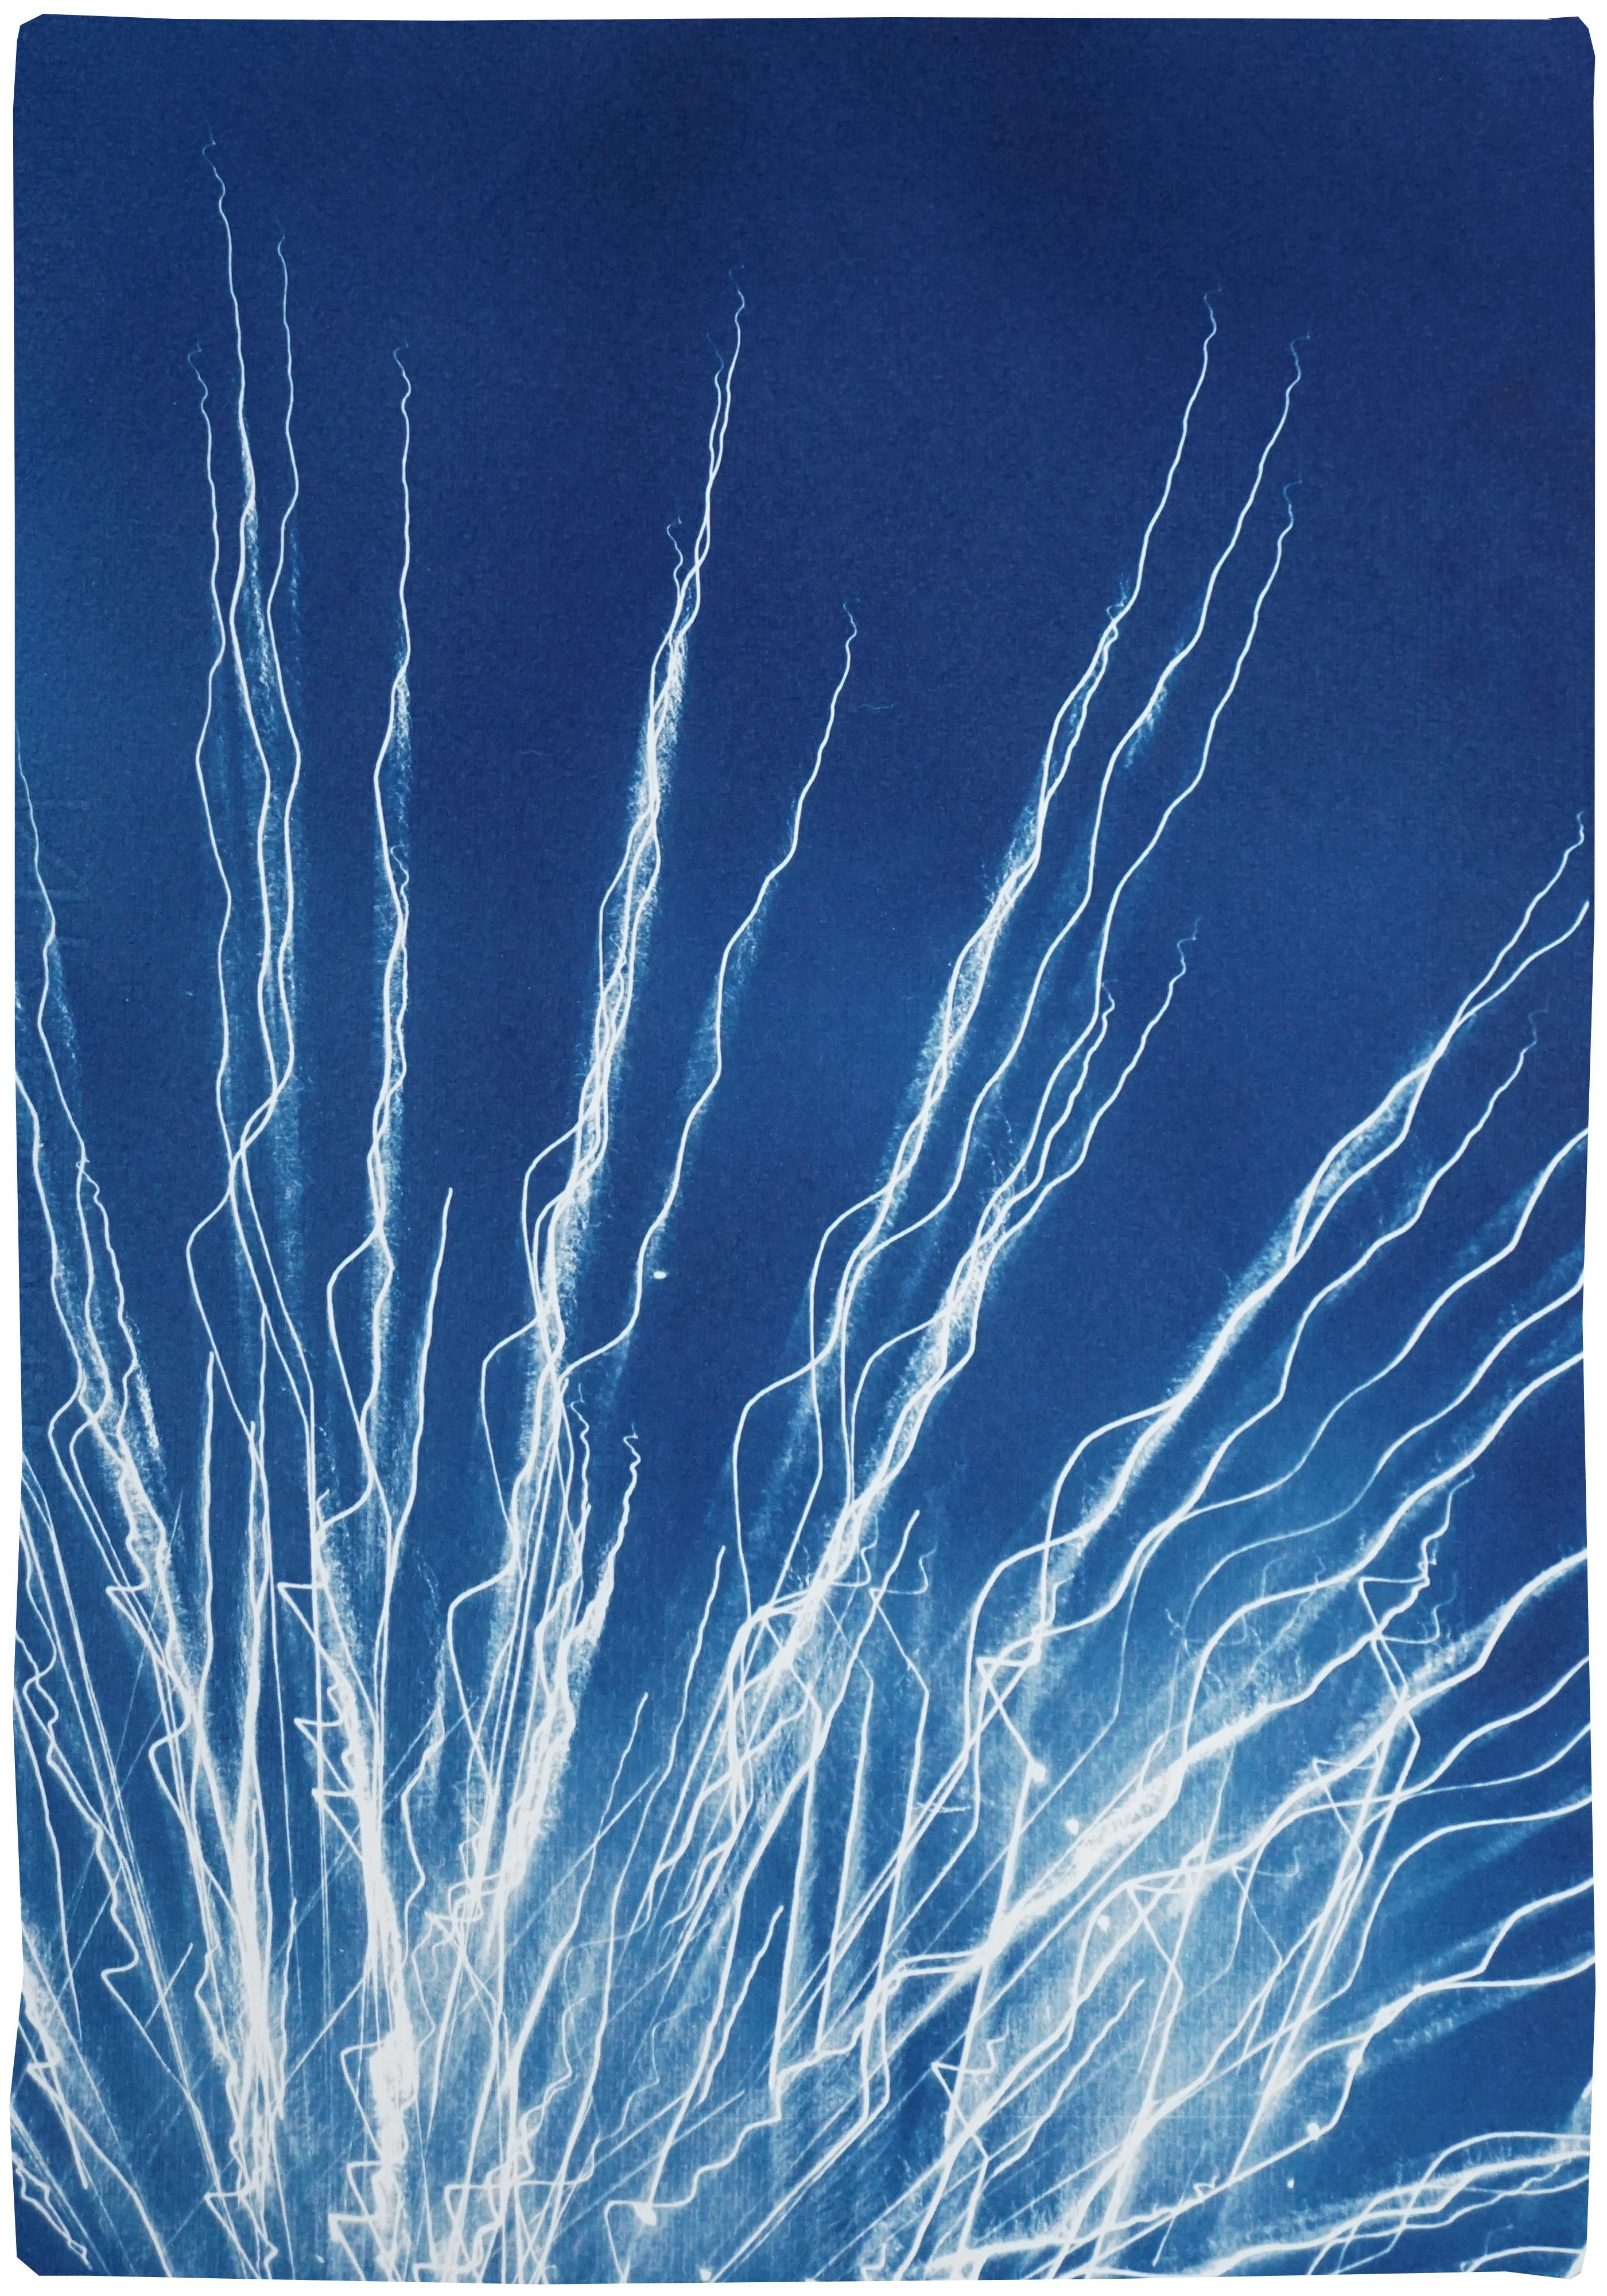 Glowing Fireworks Lights, Electric Blue and White Abstract Shapes, Cyanotype 